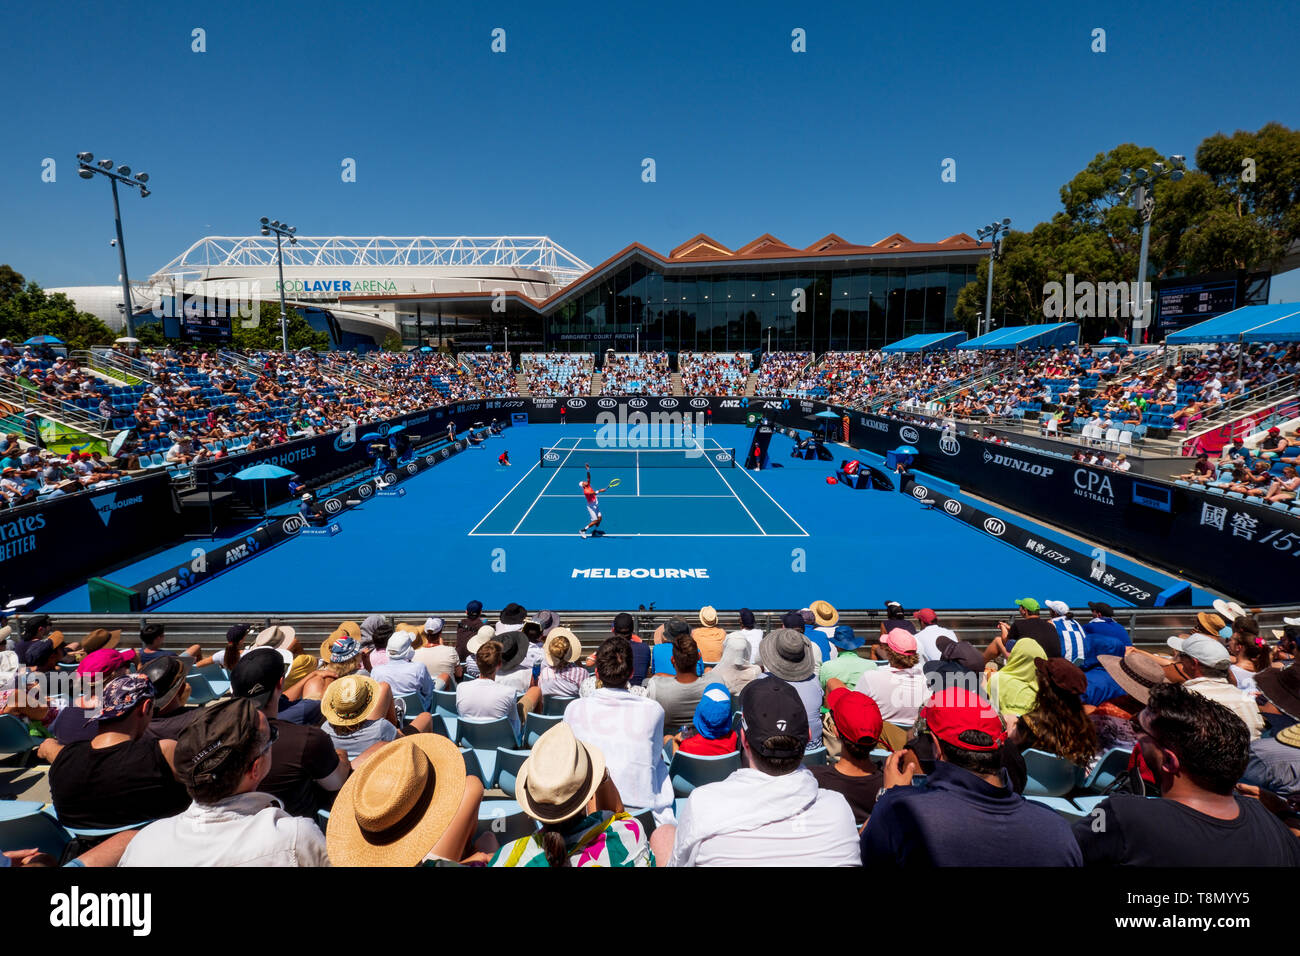 Fans attending a tennis match during the Australian Open on the outdoor Court 3 with Rod Laver Arena and Margaret Court Arena in the background. Stock Photo